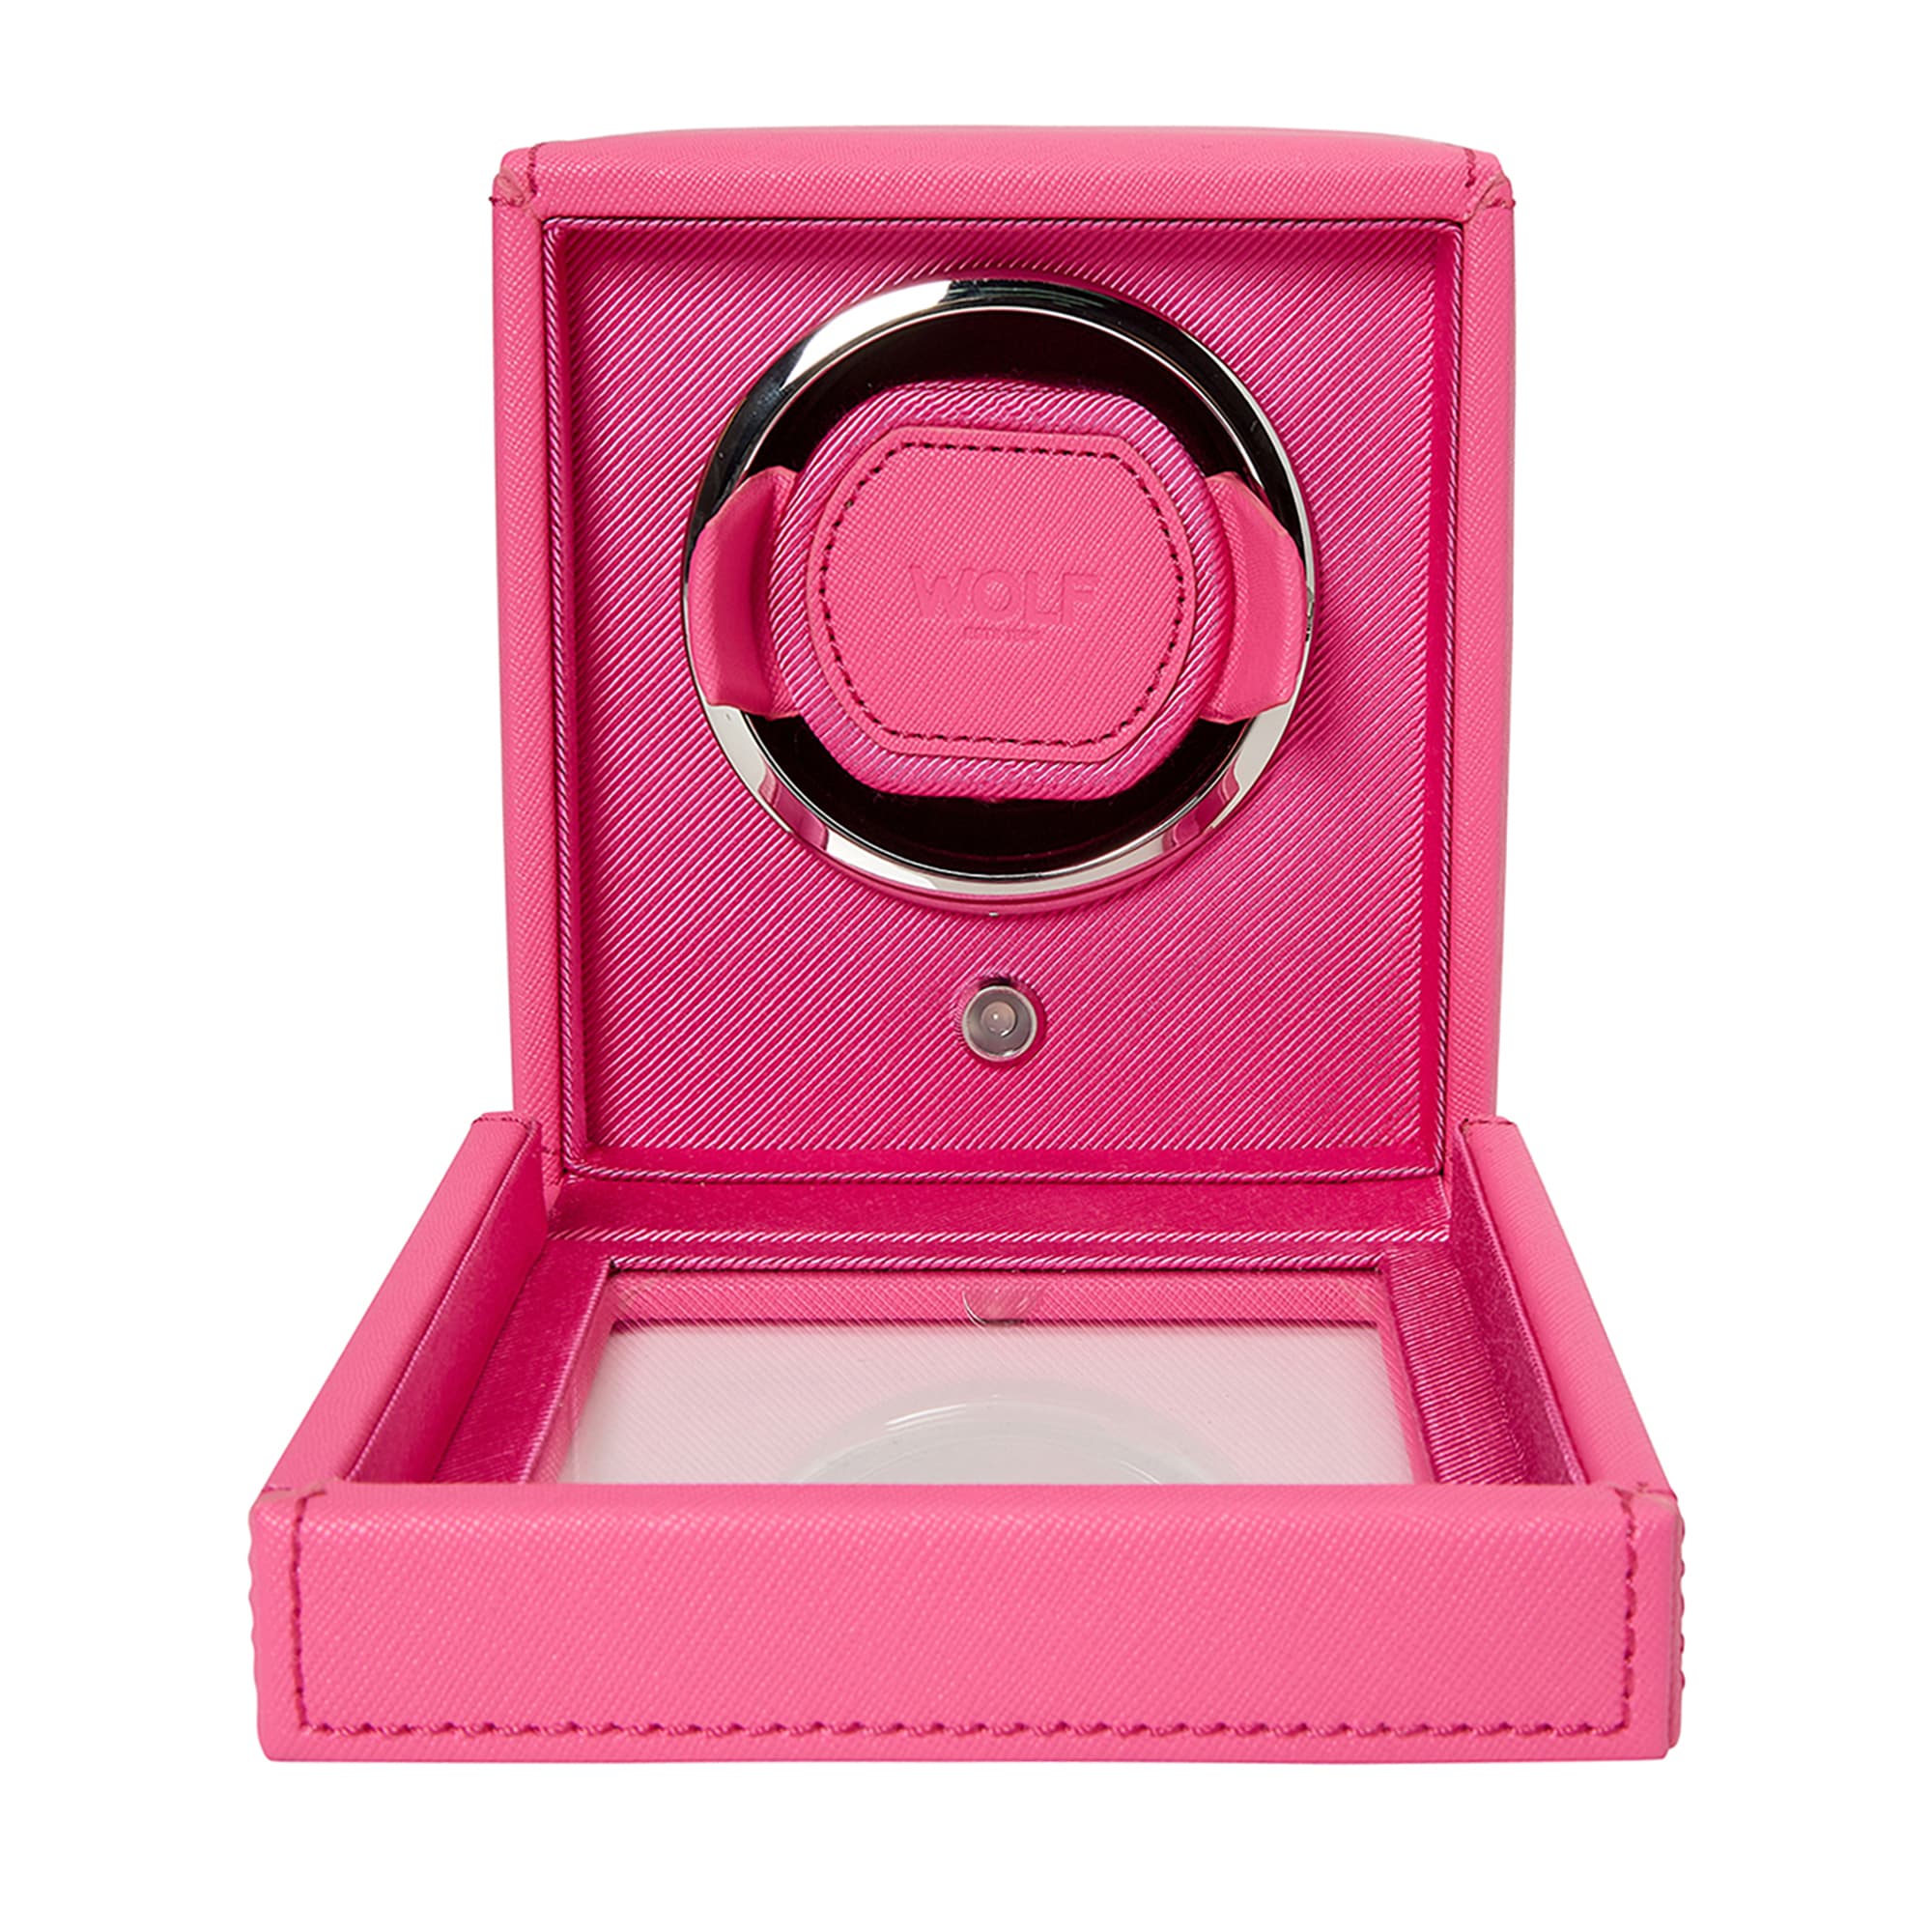 Wolf-Cub-Single-Watch-Winder-with-Cover-Pink-461190-2